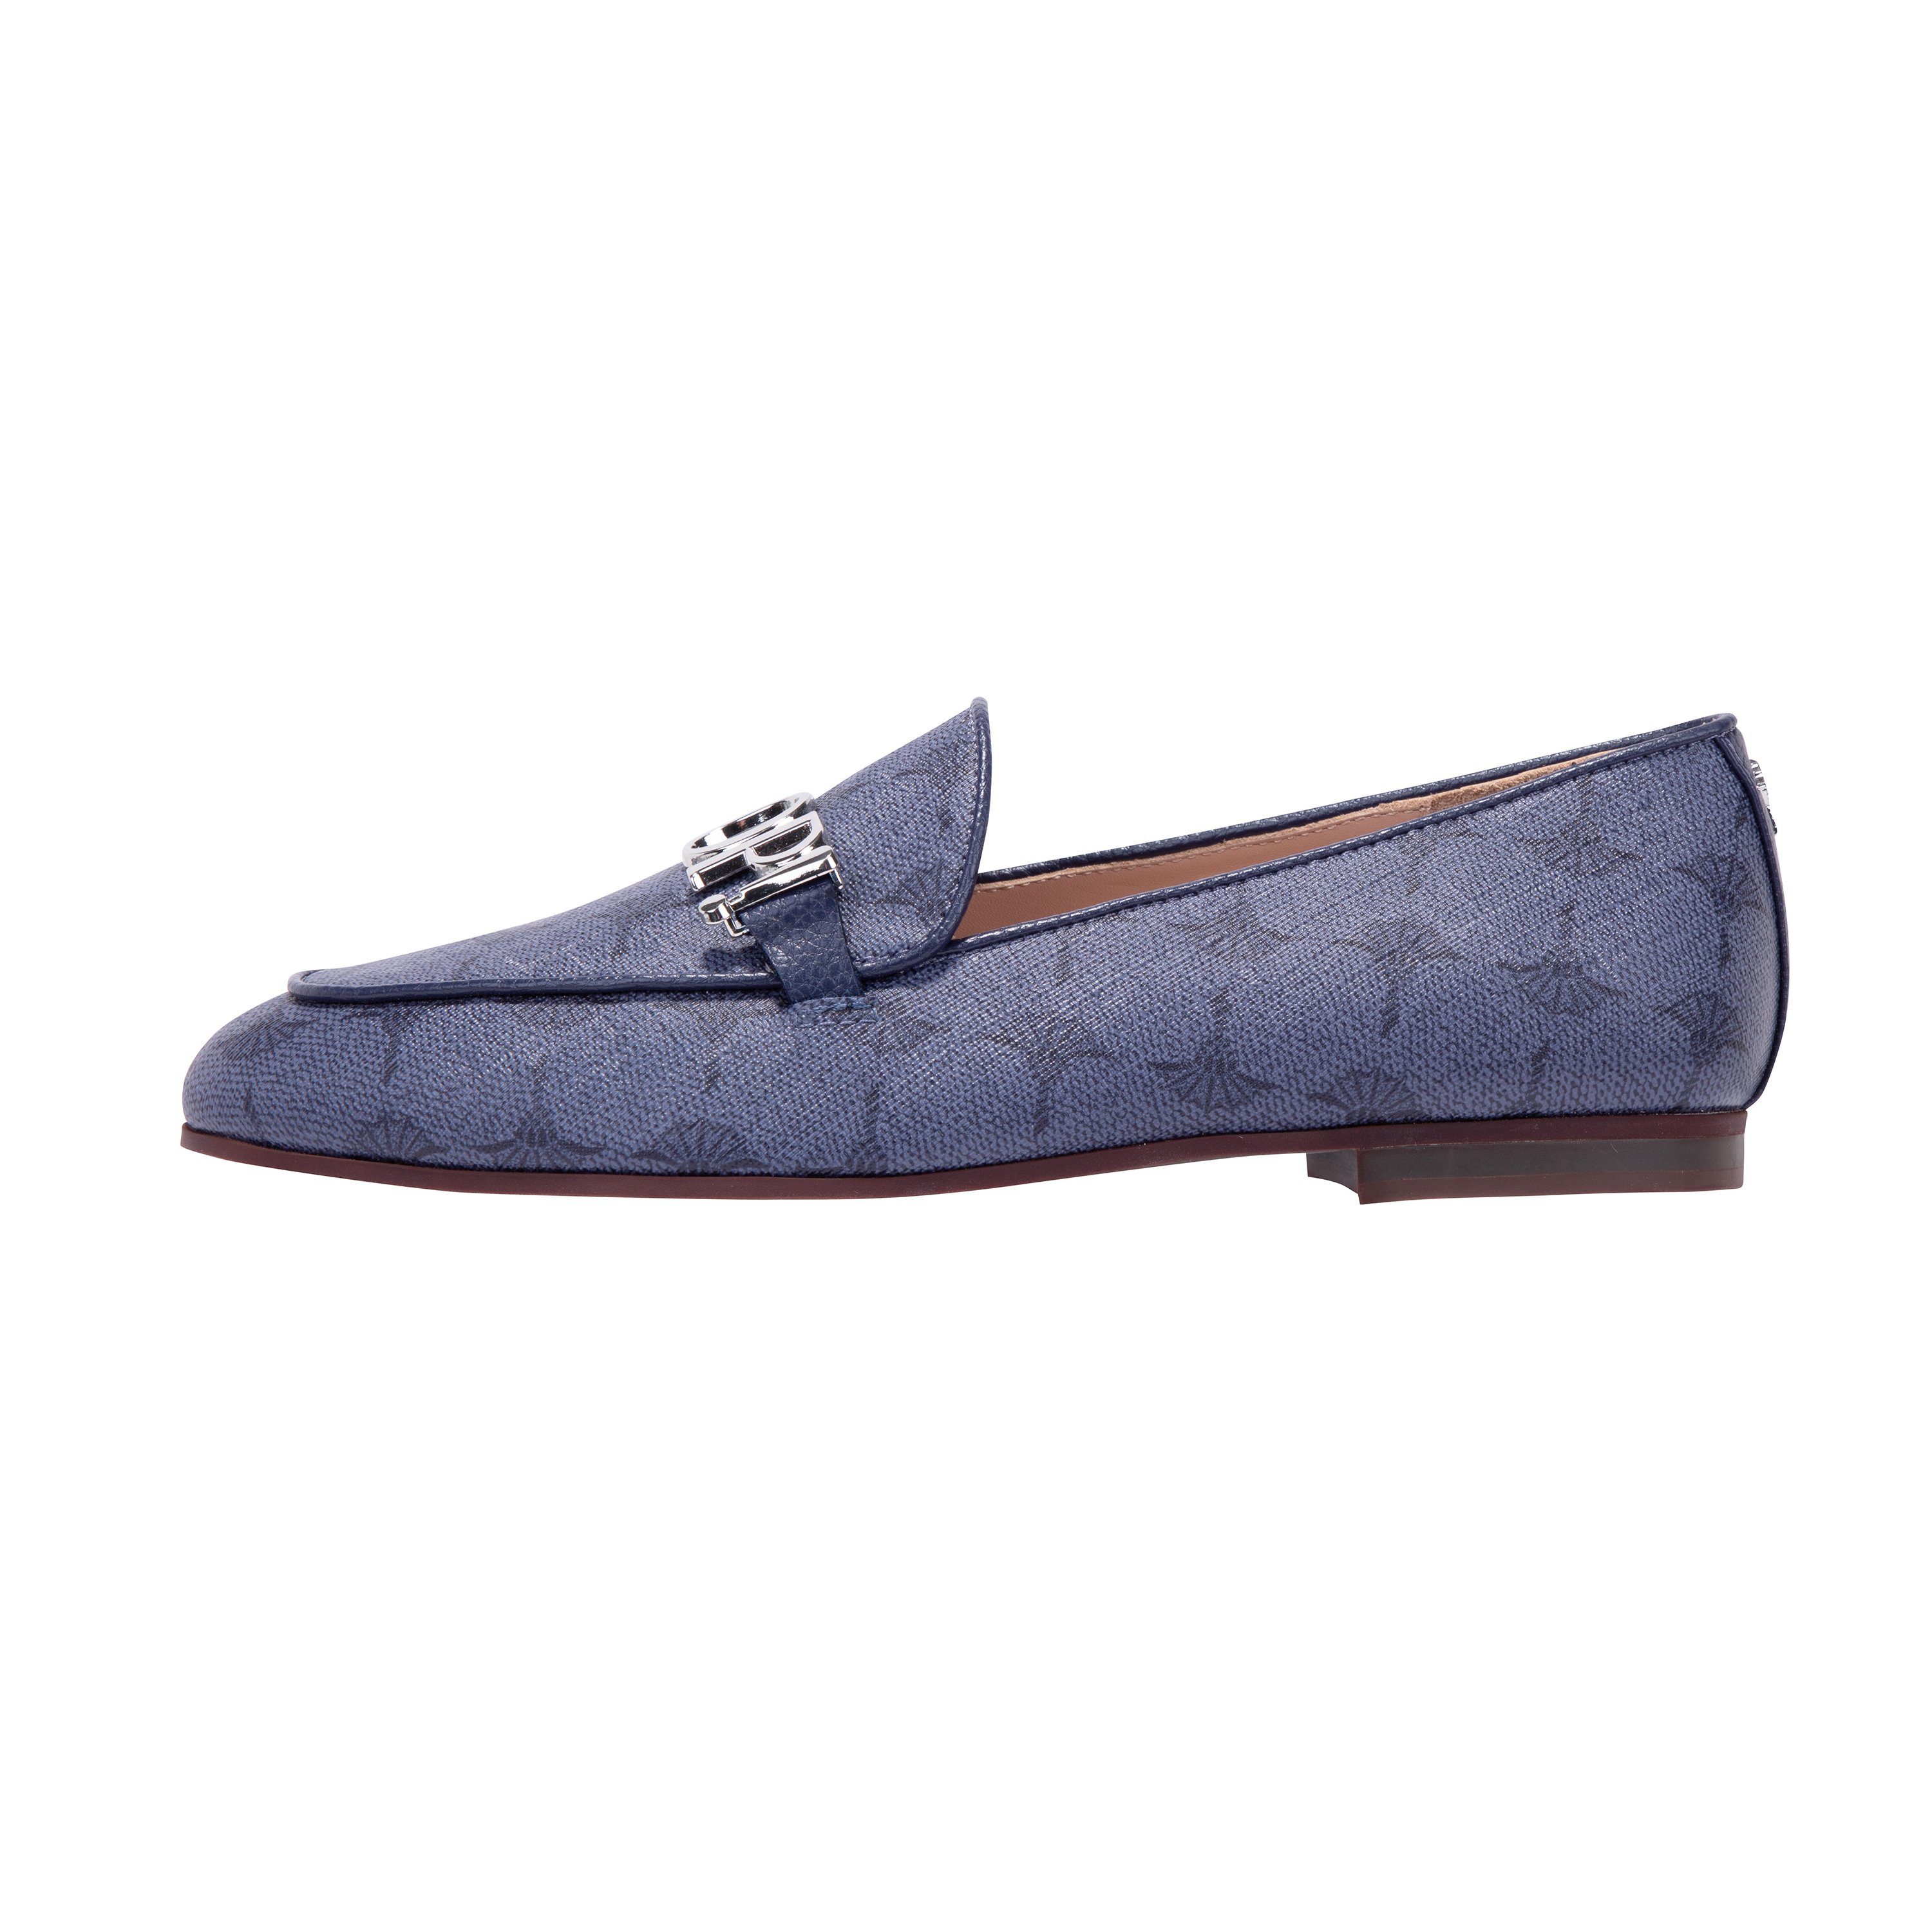 Joop! Slipper outer: synthetic, inner: microfibre medieval blue